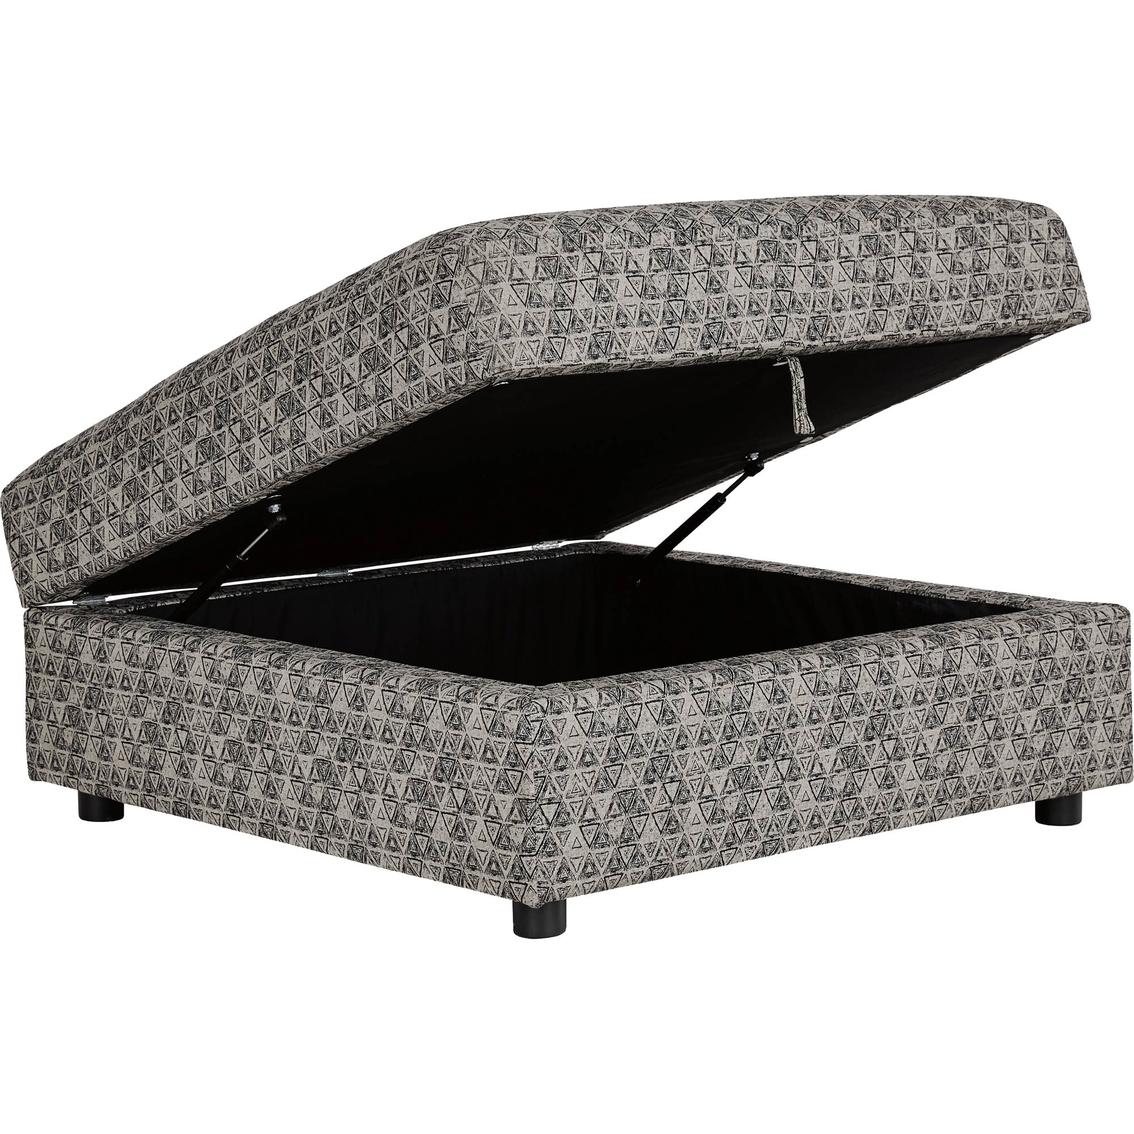 Signature Design by Ashley Kellway Ottoman with Storage - Image 2 of 4